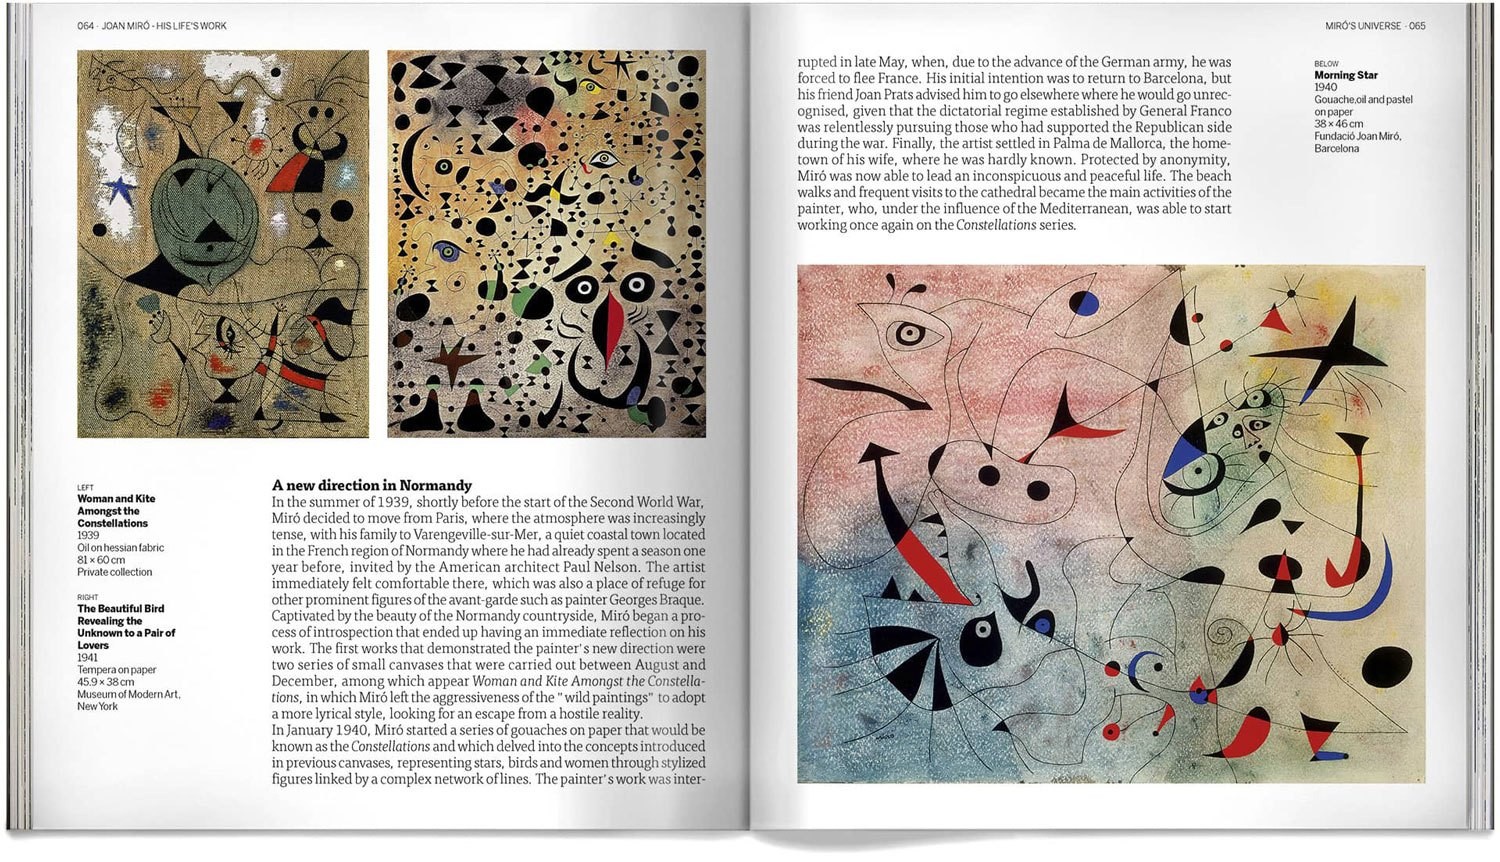 Book on Joan Miró, his life's work